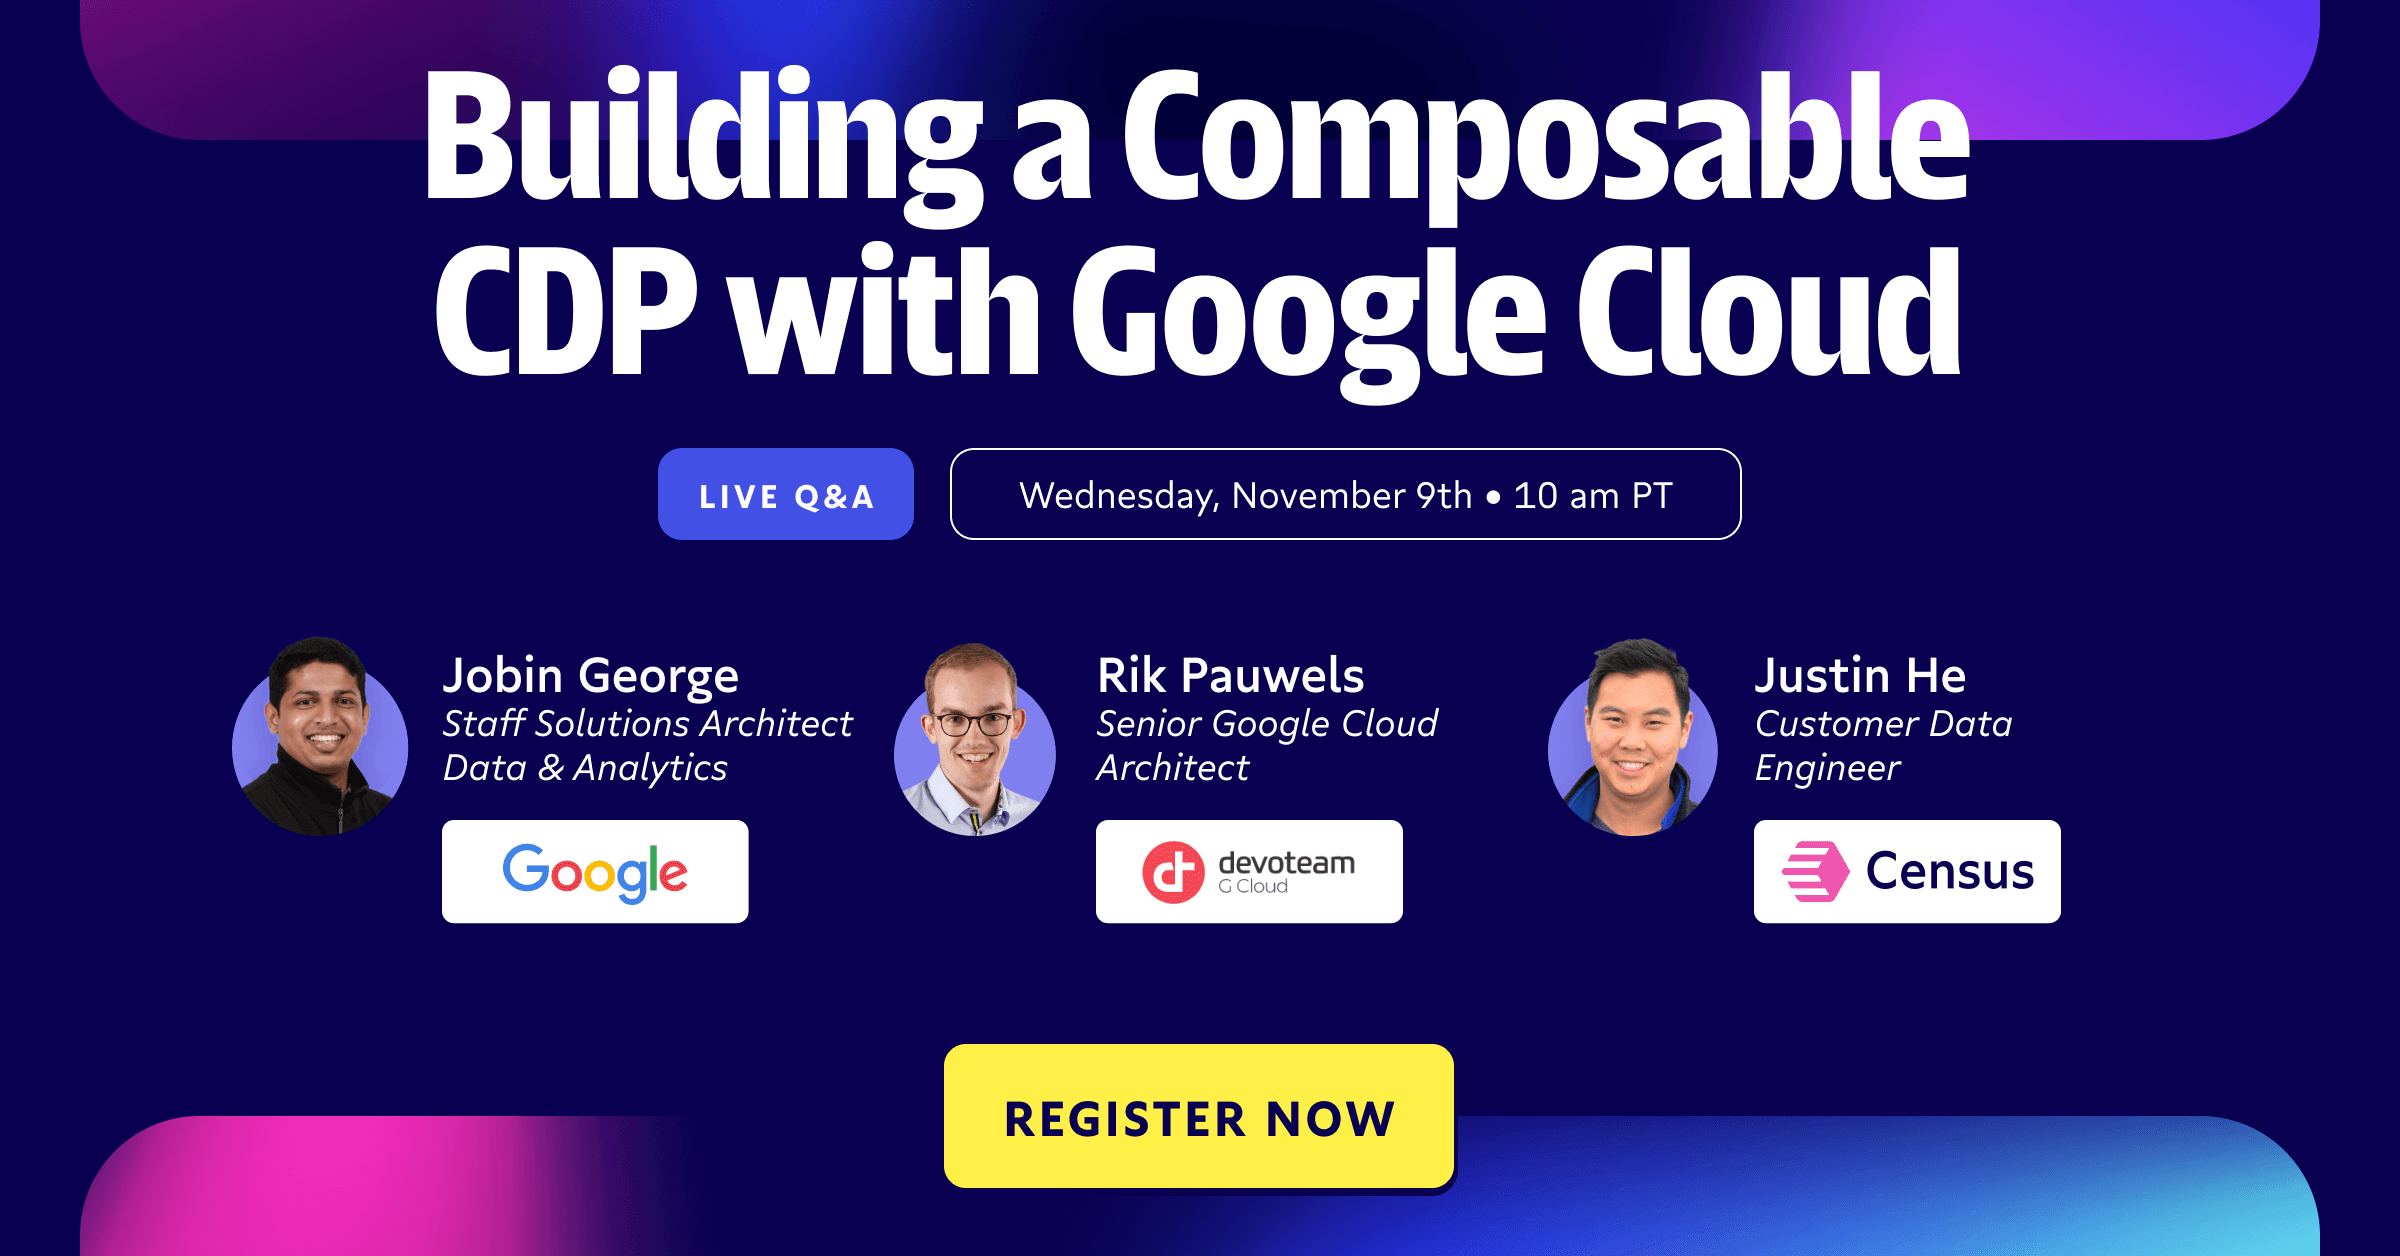 Building a Composable CDP with Google Cloud